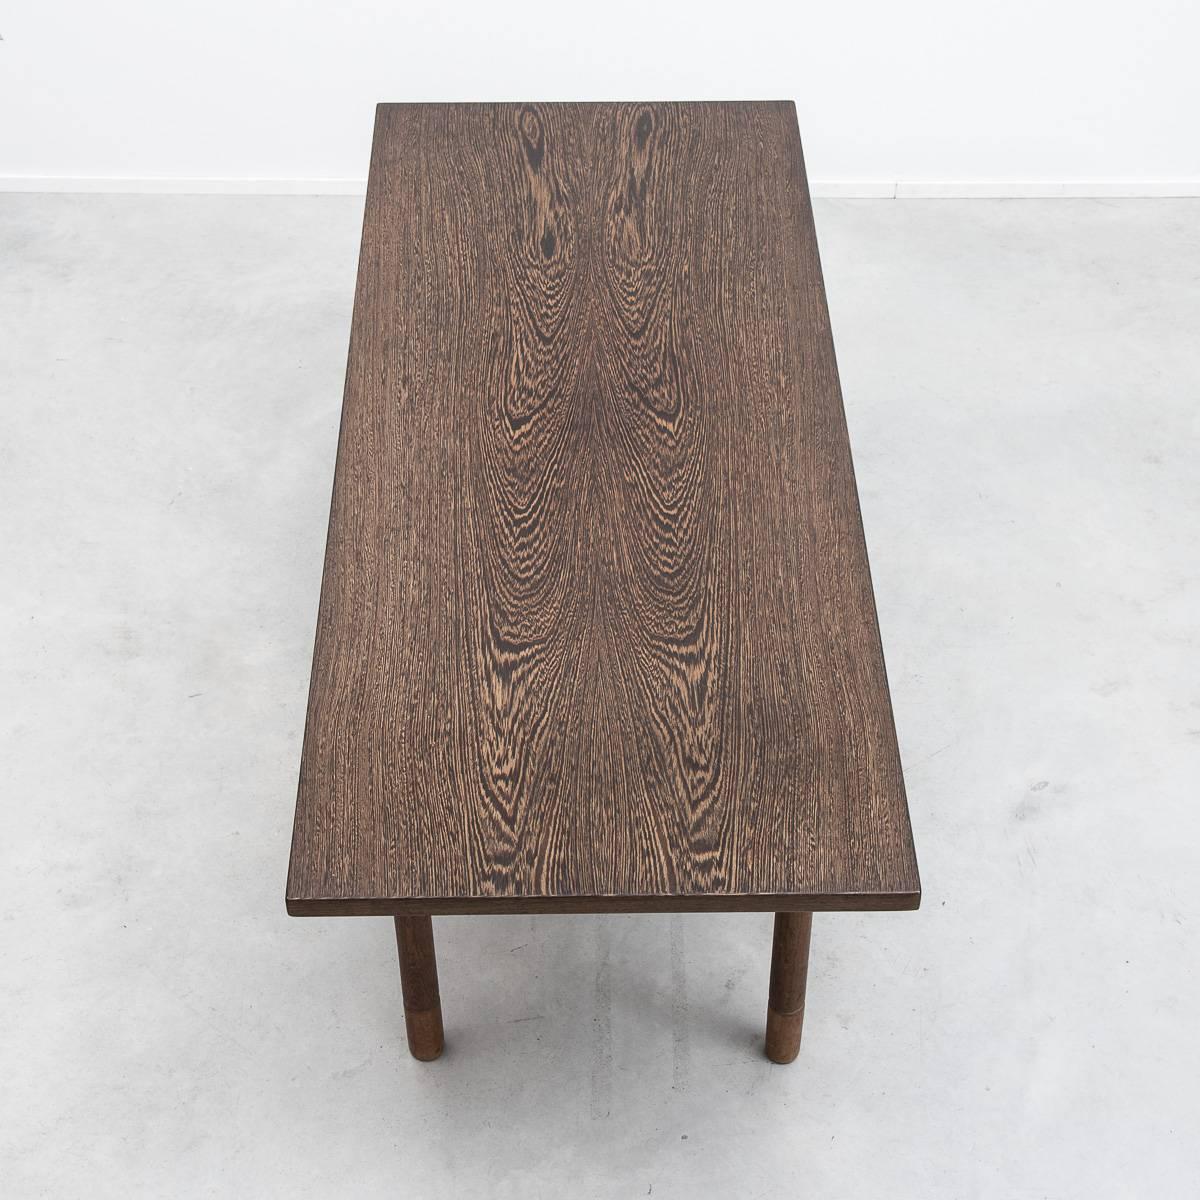 A rare and striking side table designed by the master of Danish design. The table has oak legs and an unusual and graphic wenge veneered surface. The underside is branded with the mark of the manufacturer Andreas Tuck indicating it belongs to an